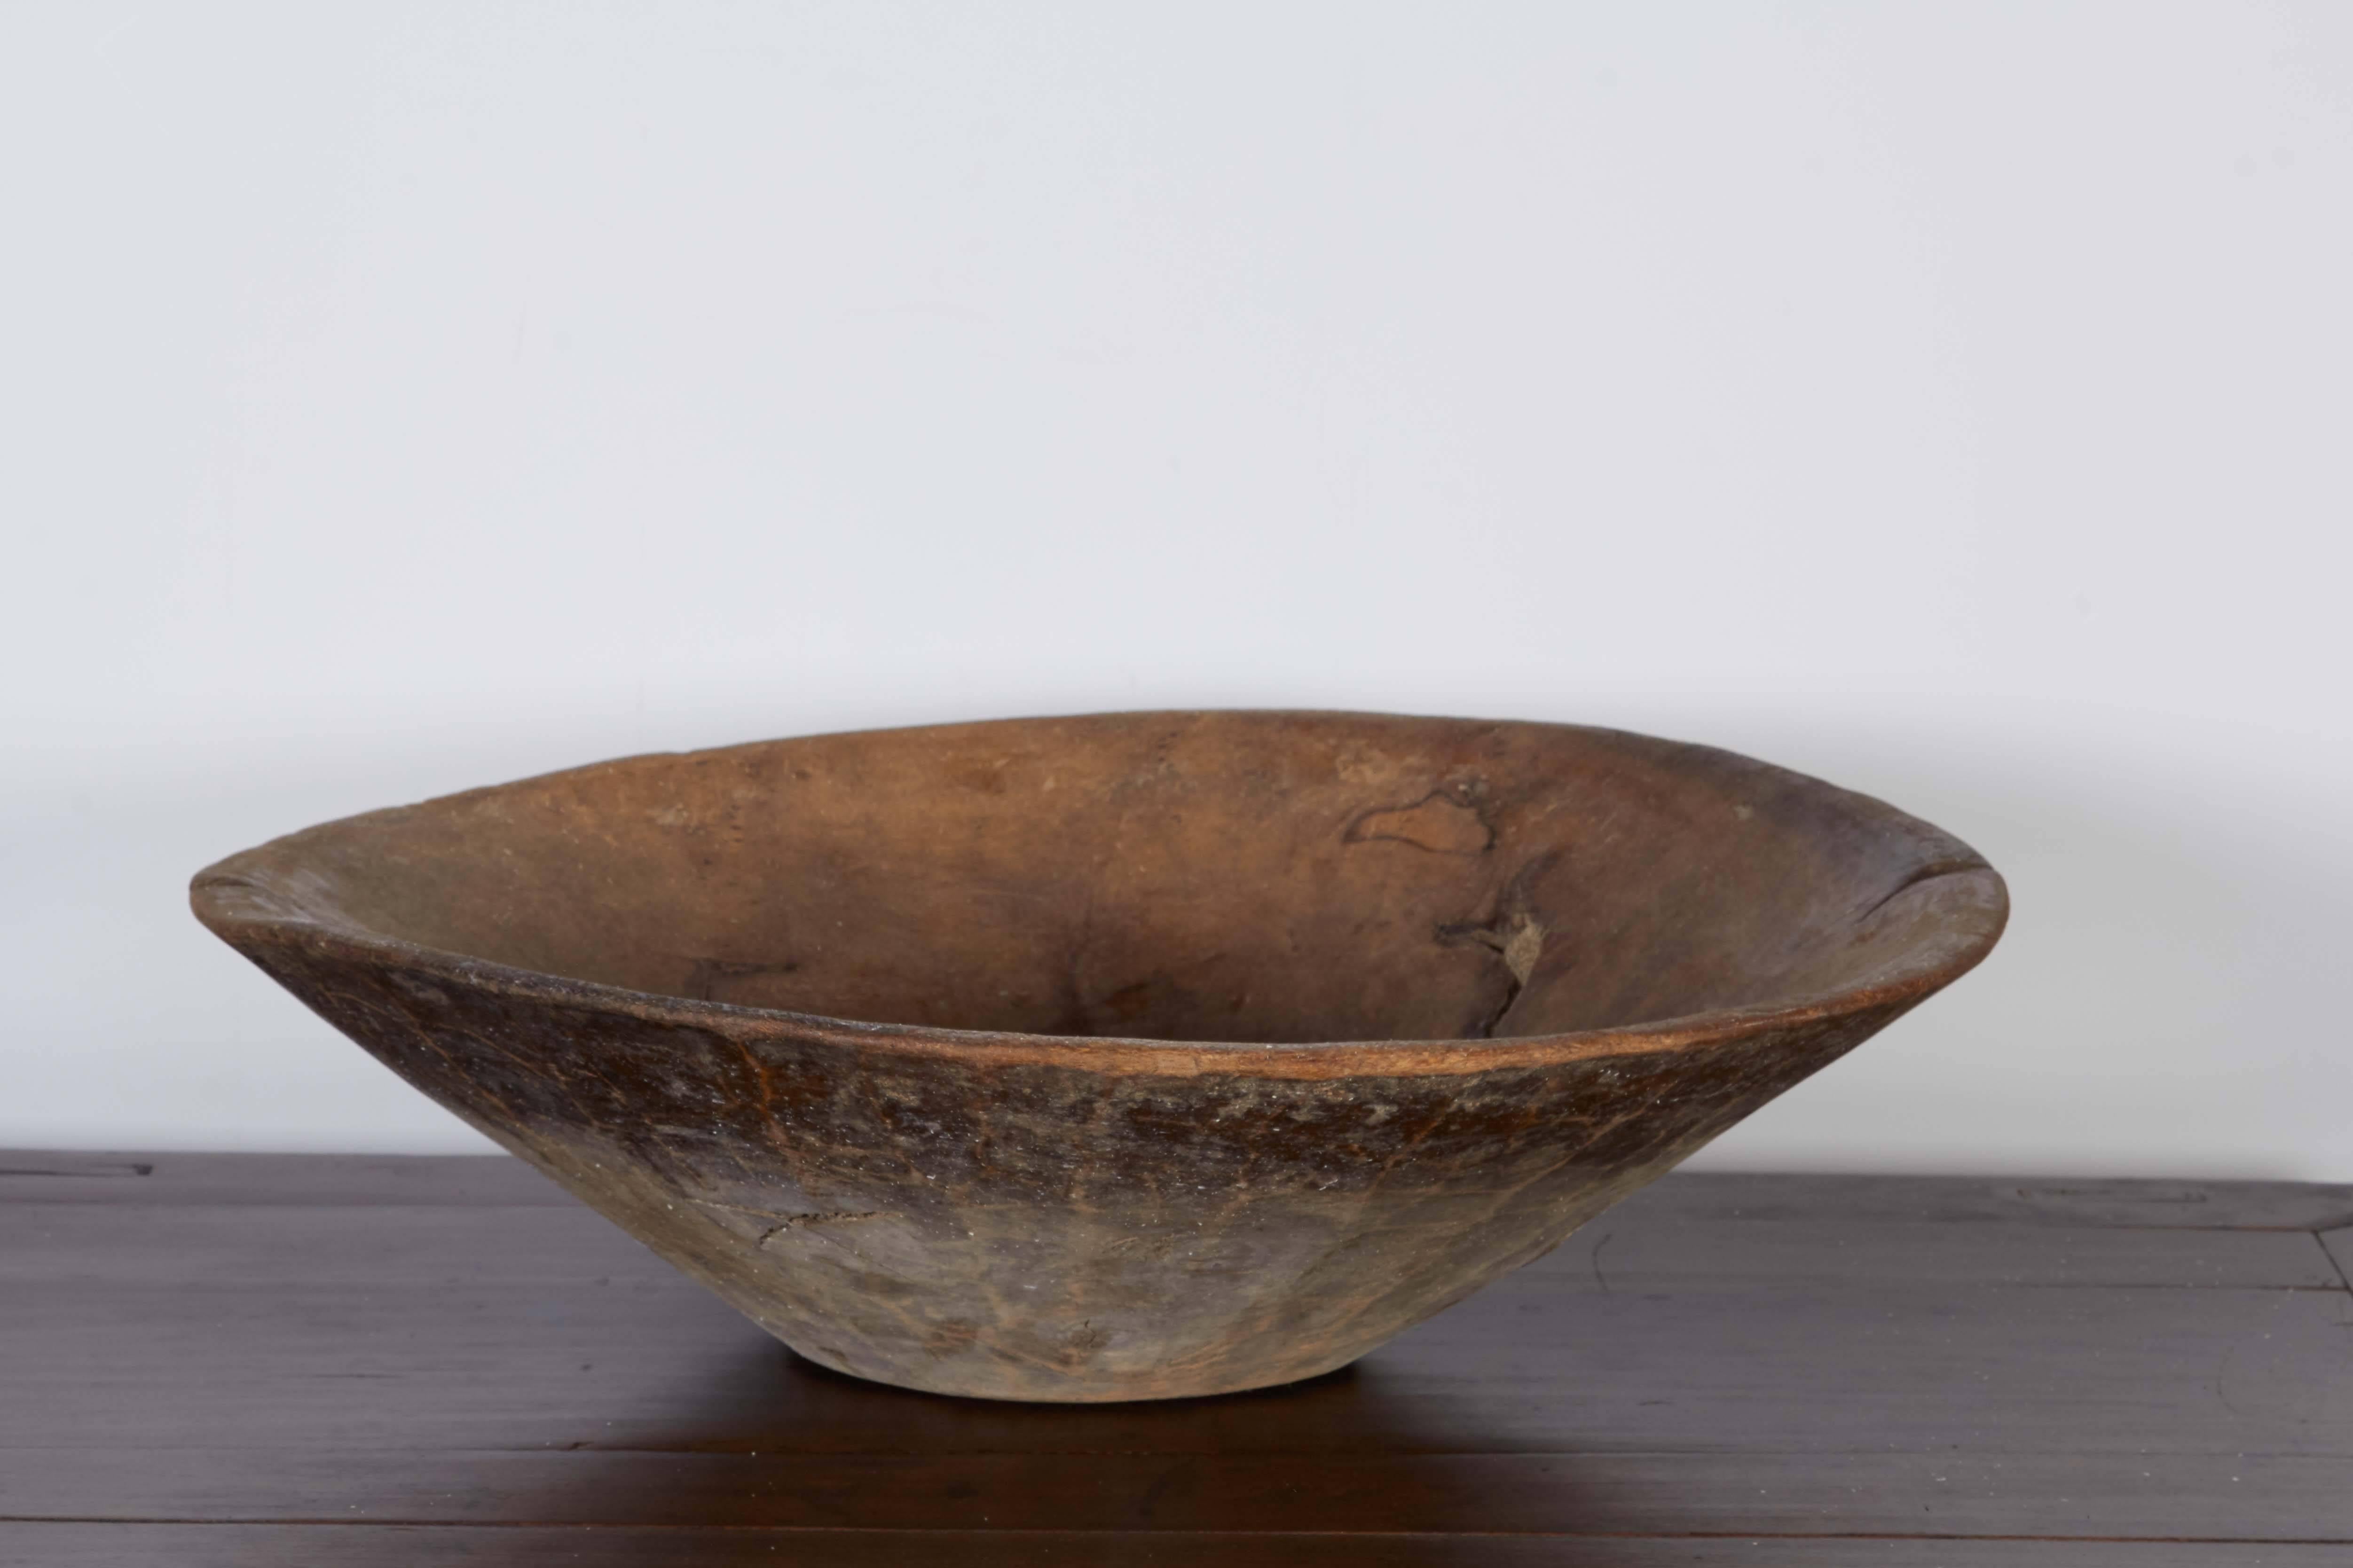 A graceful and large working bowl showing the wear of many years of use and displaying a beautiful patina. Makes a wonderful centrepiece.
BT393.